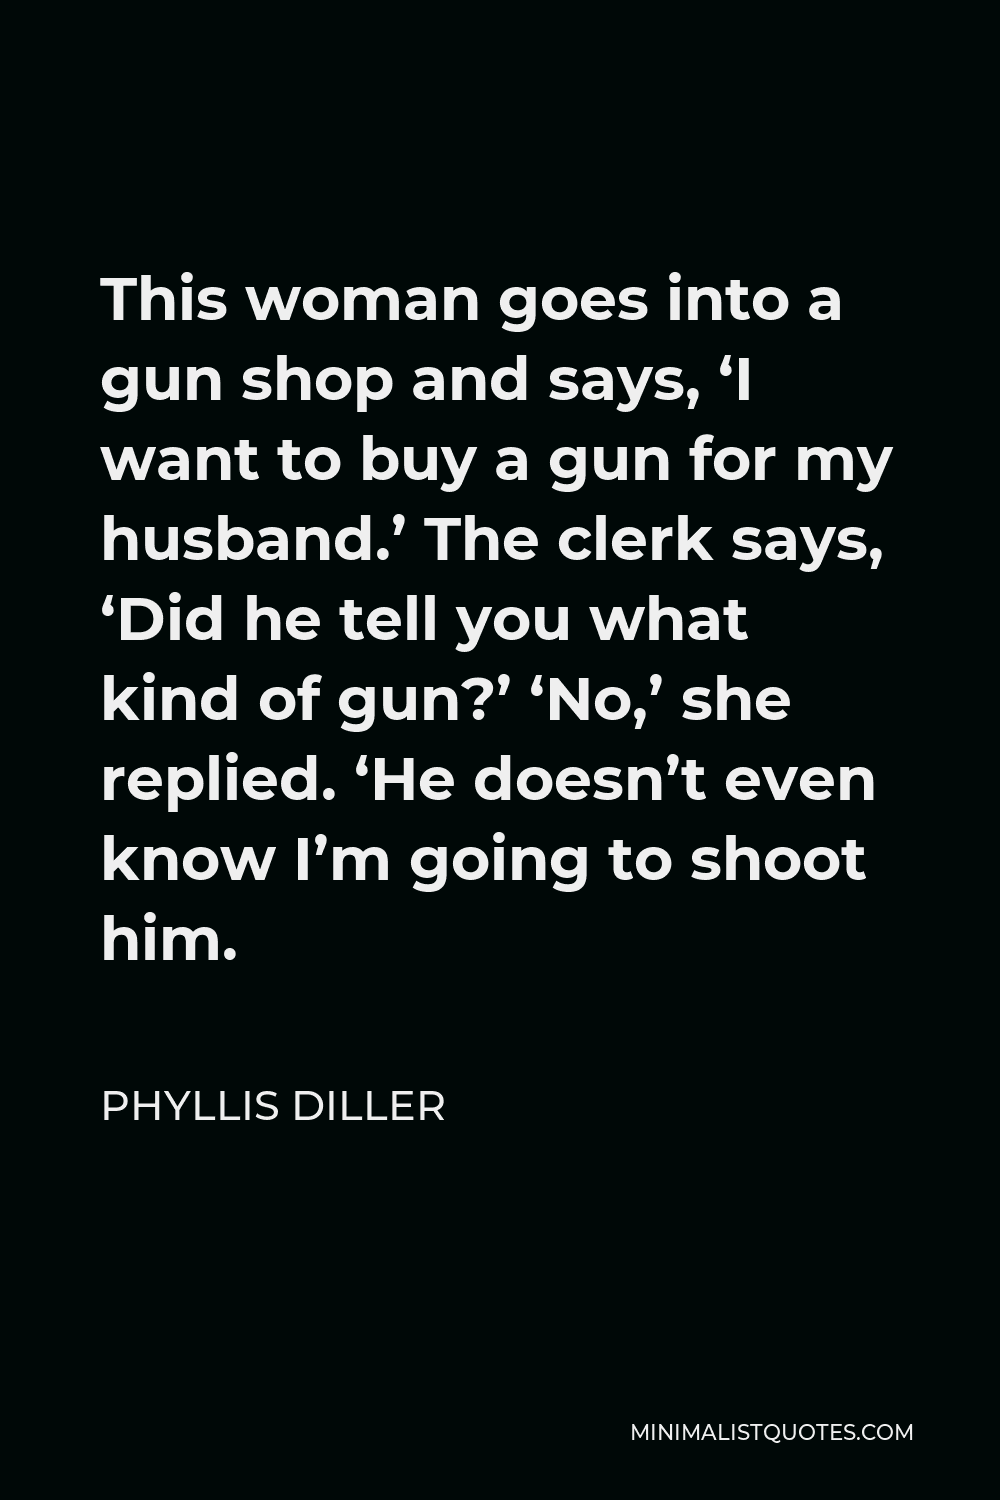 Phyllis Diller Quote - This woman goes into a gun shop and says, ‘I want to buy a gun for my husband.’ The clerk says, ‘Did he tell you what kind of gun?’ ‘No,’ she replied. ‘He doesn’t even know I’m going to shoot him.